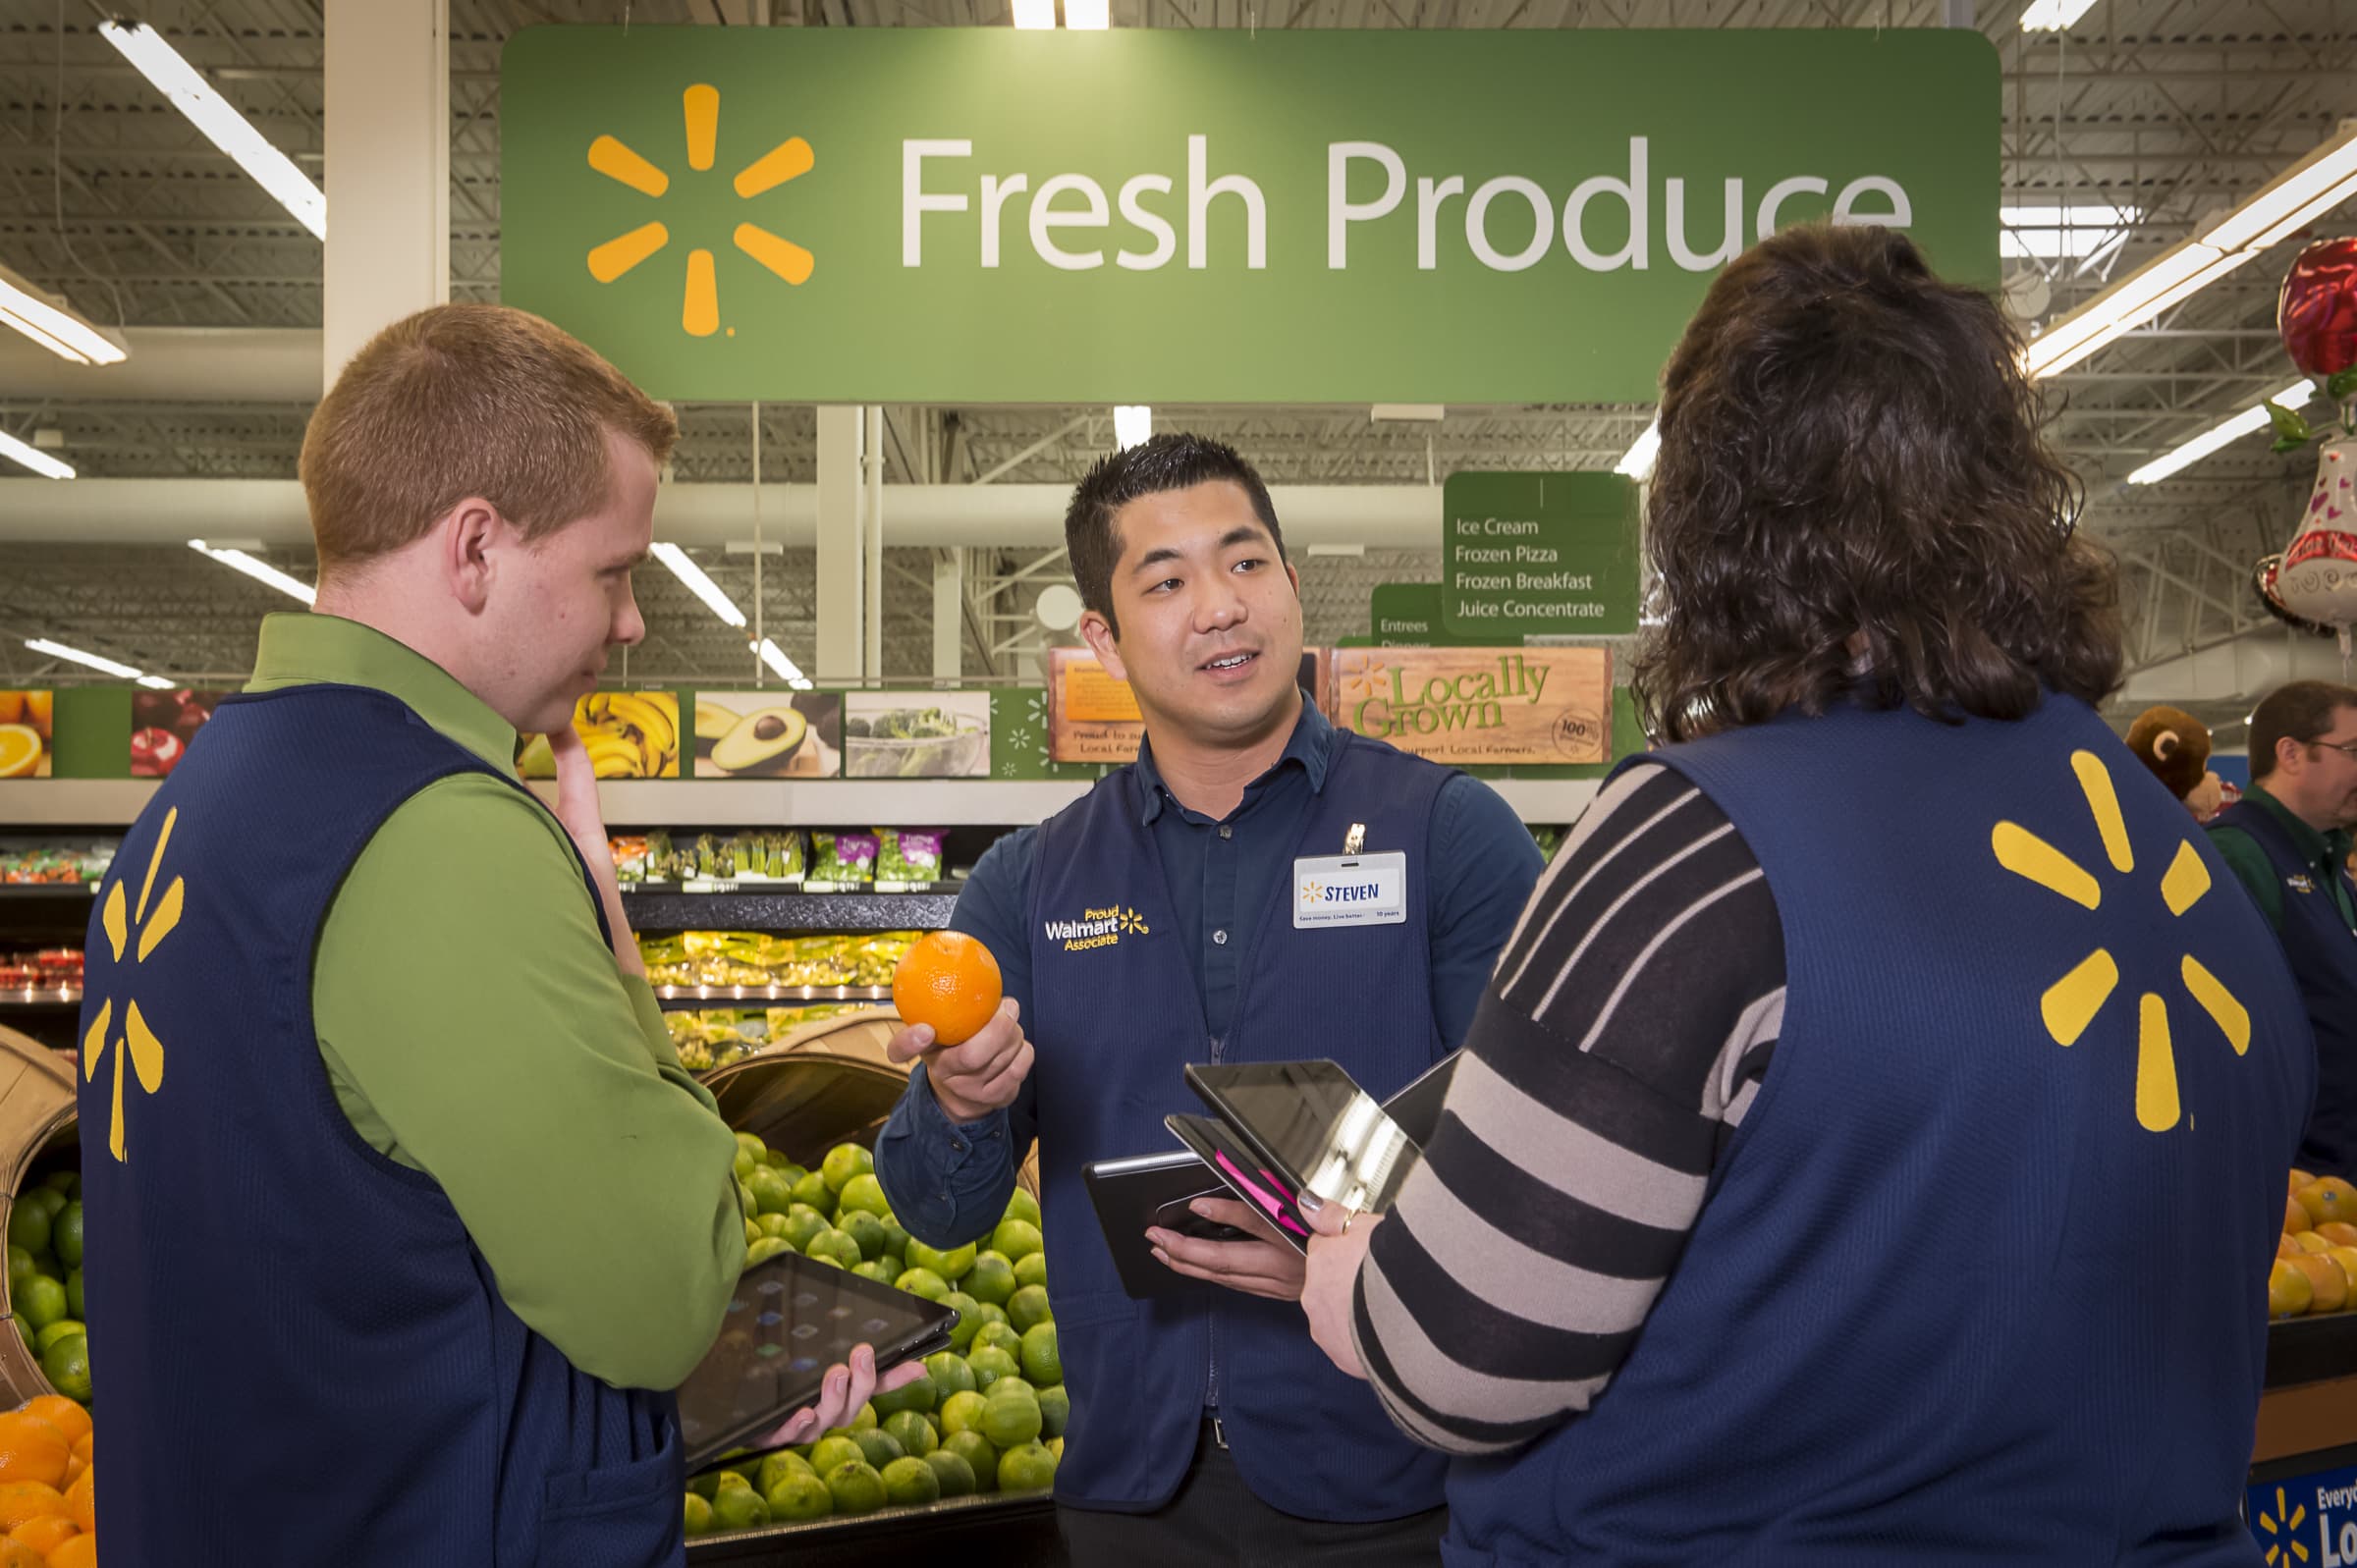 Wal Mart Ups Entry Level Manager Salaries Ahead Of Overtime Rule. walmart p...